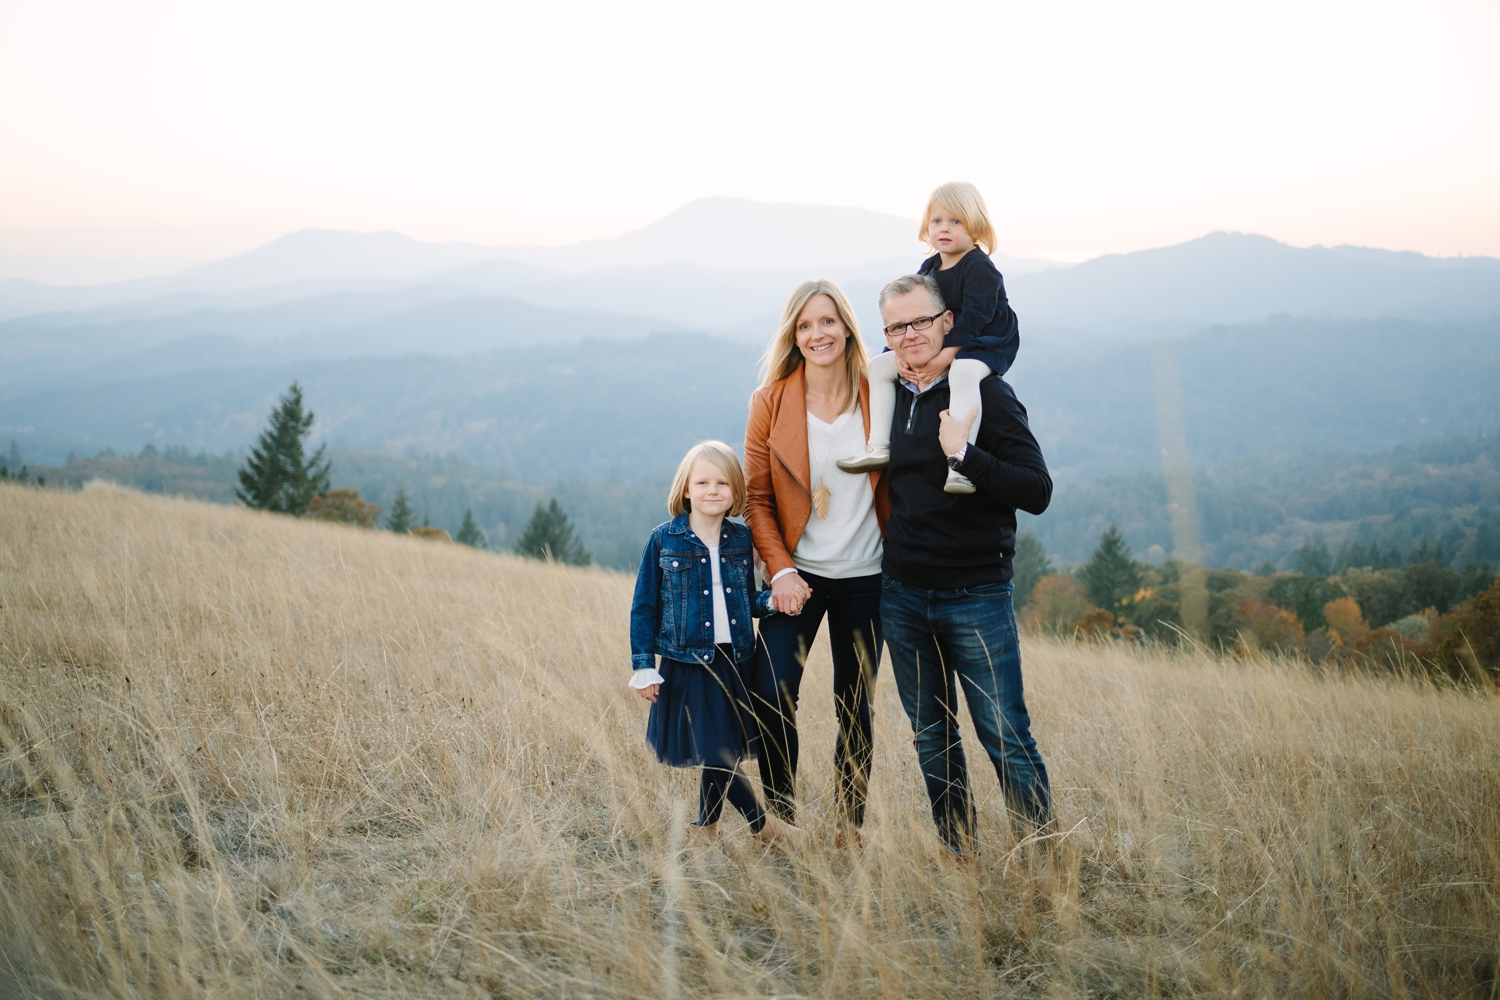 Family portraits outdoors with mountain view by photographer Ali Smith Thistledown Photography in Oregon